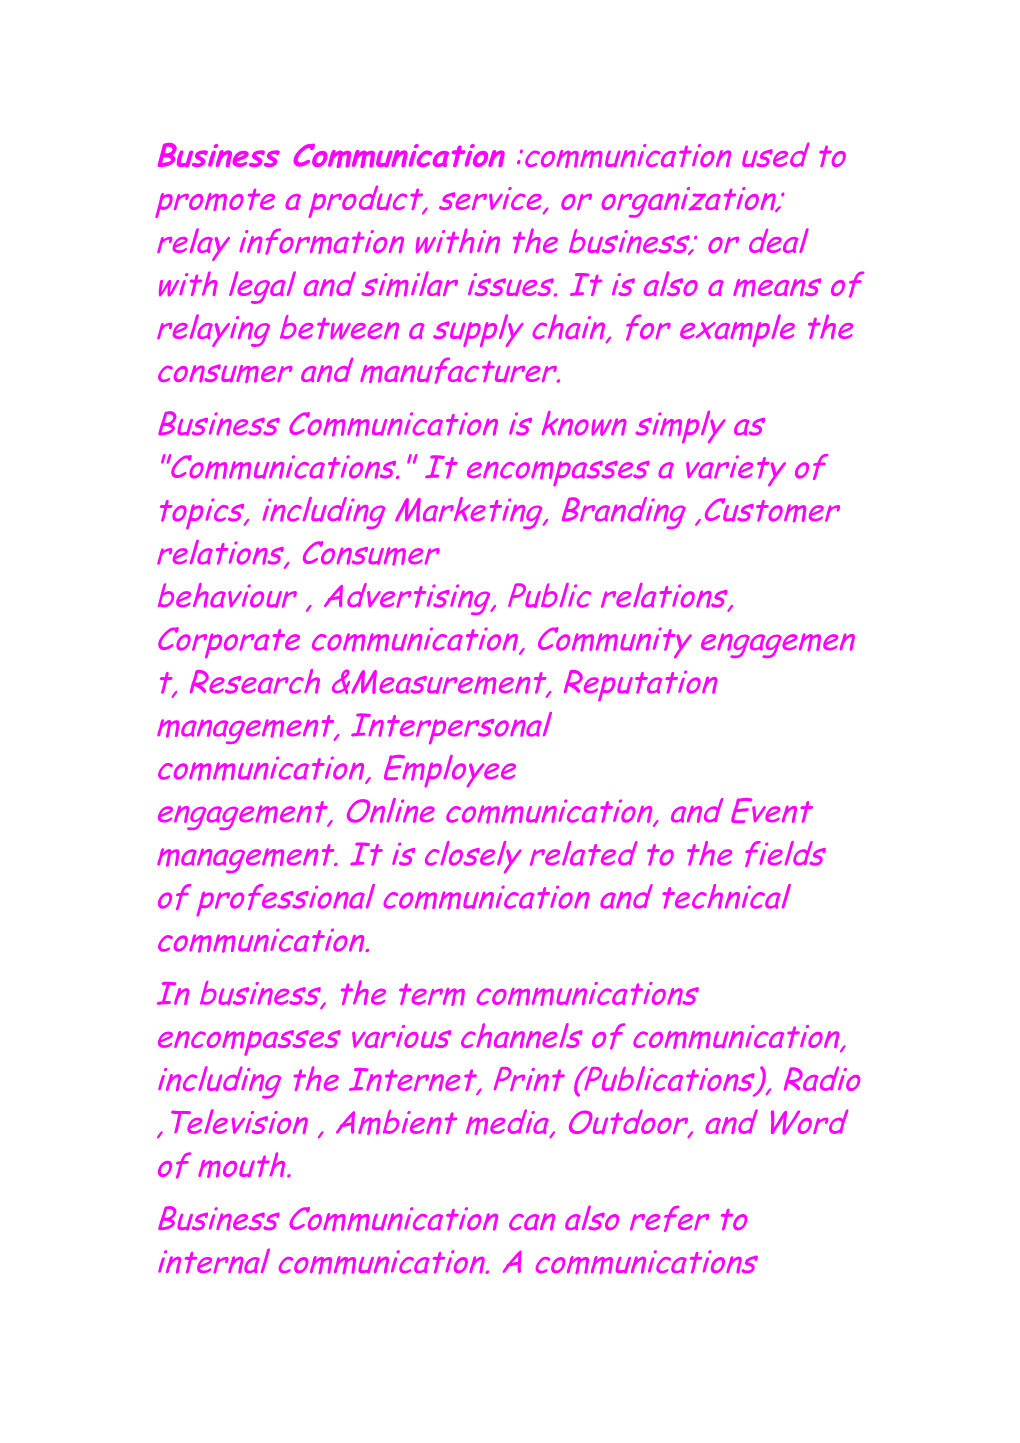 Business Communication :Communication Used to Promote a Product, Service, Or Organization;